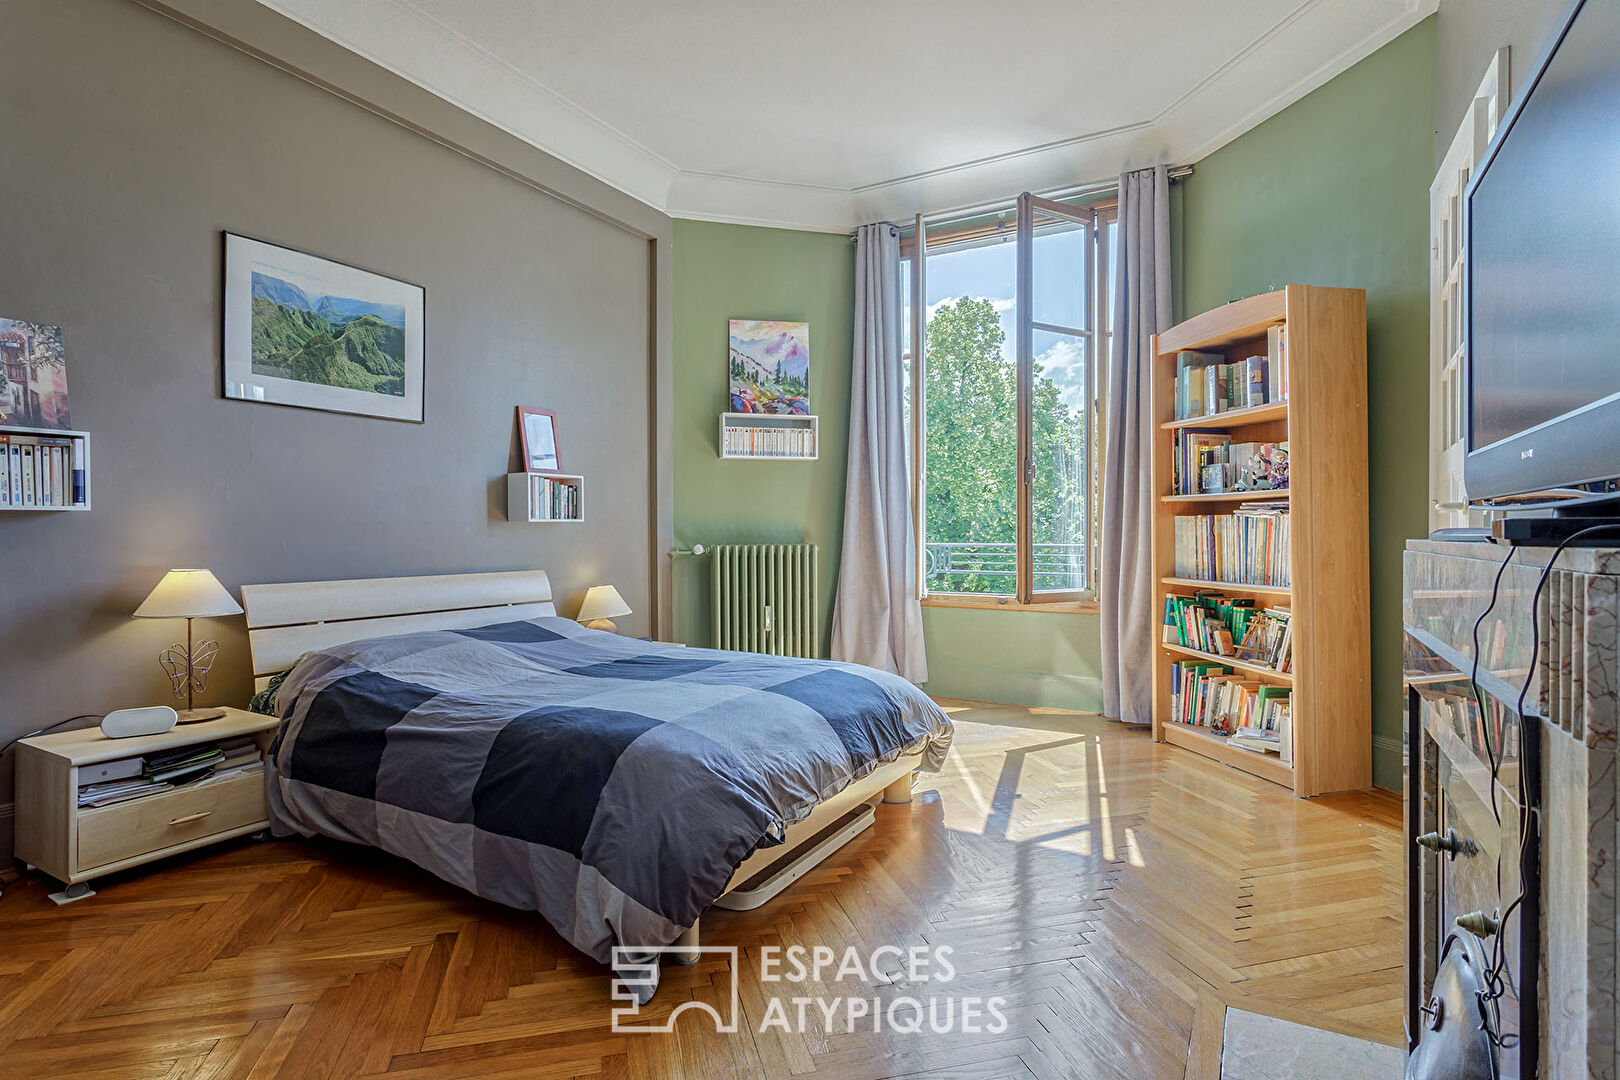 A gem of an apartment of 178 sqm in the heart of the city